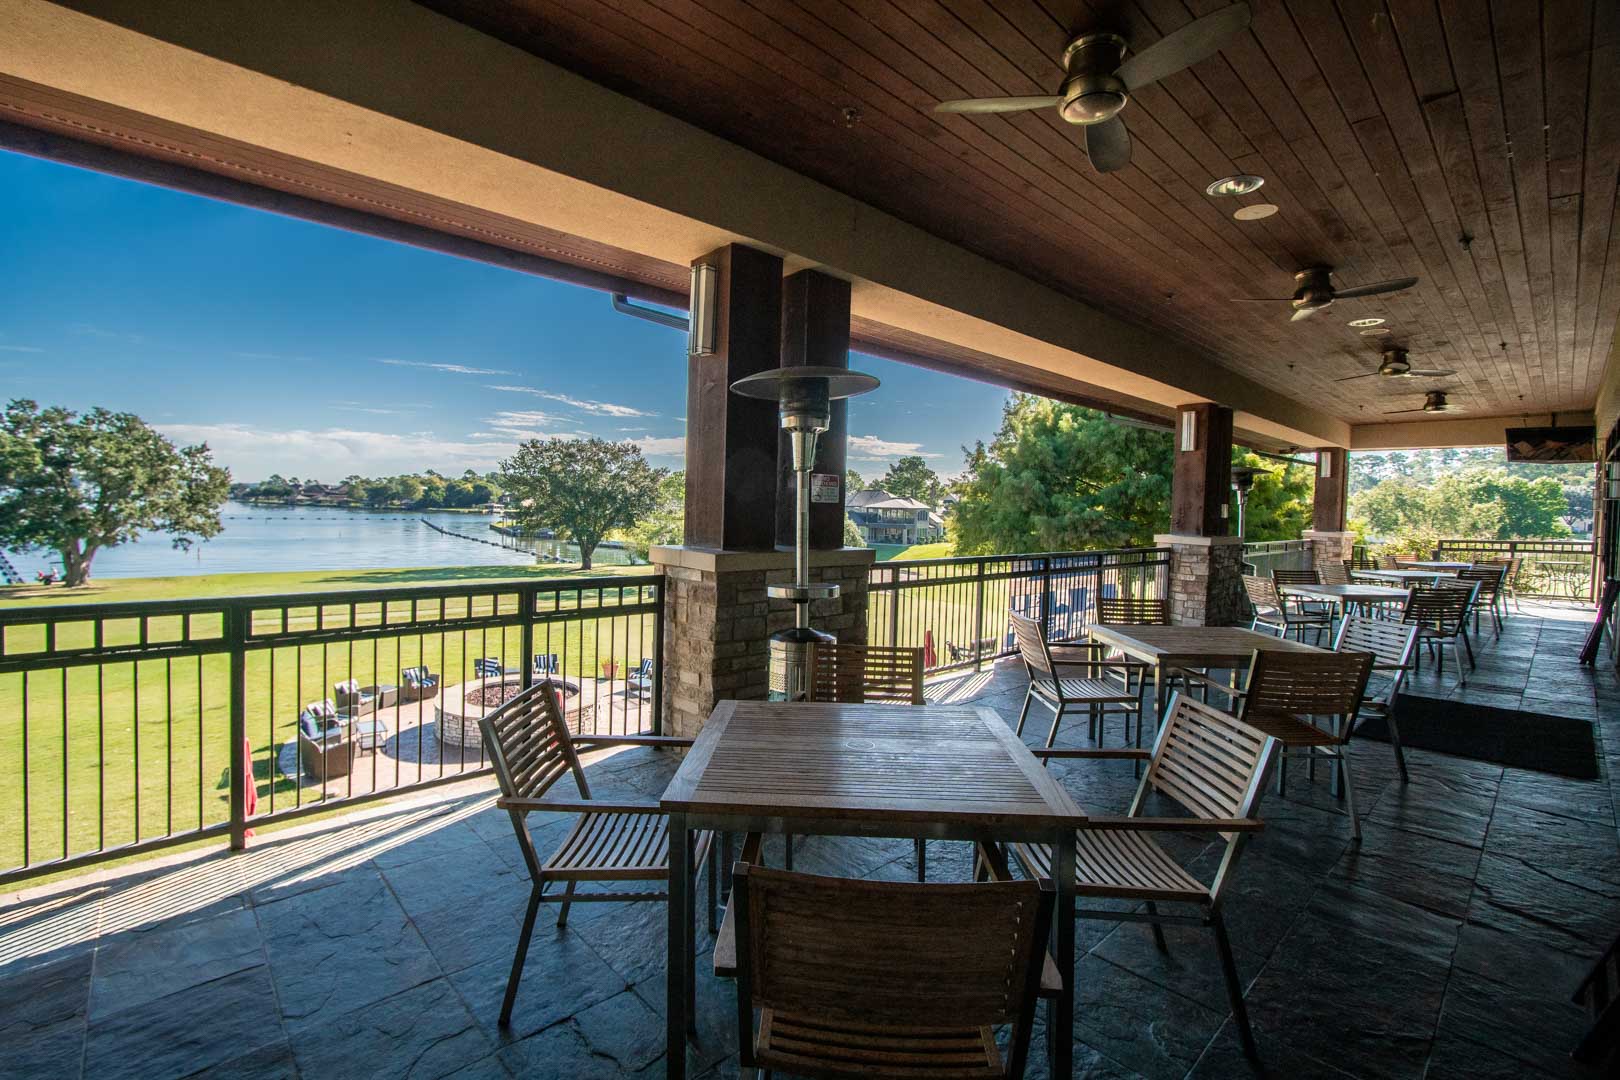 A peaceful view overlooking the lake at VRI's Sweetwater at Lake Conroe in Montgomery, TX.